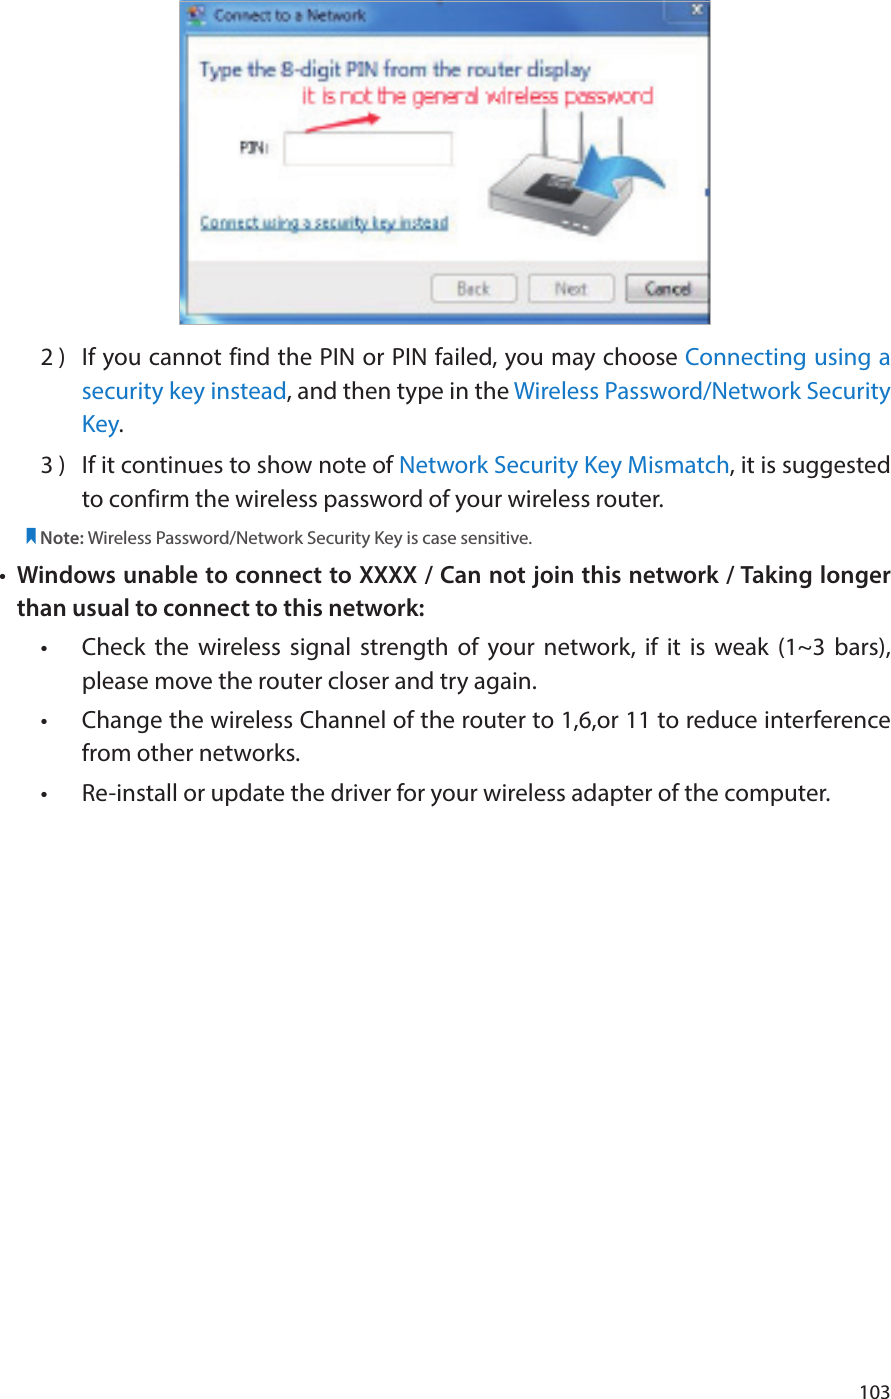 1032 )  If you cannot find the PIN or PIN failed, you may choose Connecting using a security key instead, and then type in the Wireless Password/Network Security Key.3 )  If it continues to show note of Network Security Key Mismatch, it is suggested to confirm the wireless password of your wireless router.  Note: Wireless Password/Network Security Key is case sensitive.•  Windows unable to connect to XXXX / Can not join this network / Taking longer than usual to connect to this network:•  Check the wireless signal strength of your network, if it is weak (1~3 bars), please move the router closer and try again.•  Change the wireless Channel of the router to 1,6,or 11 to reduce interference from other networks.•  Re-install or update the driver for your wireless adapter of the computer.